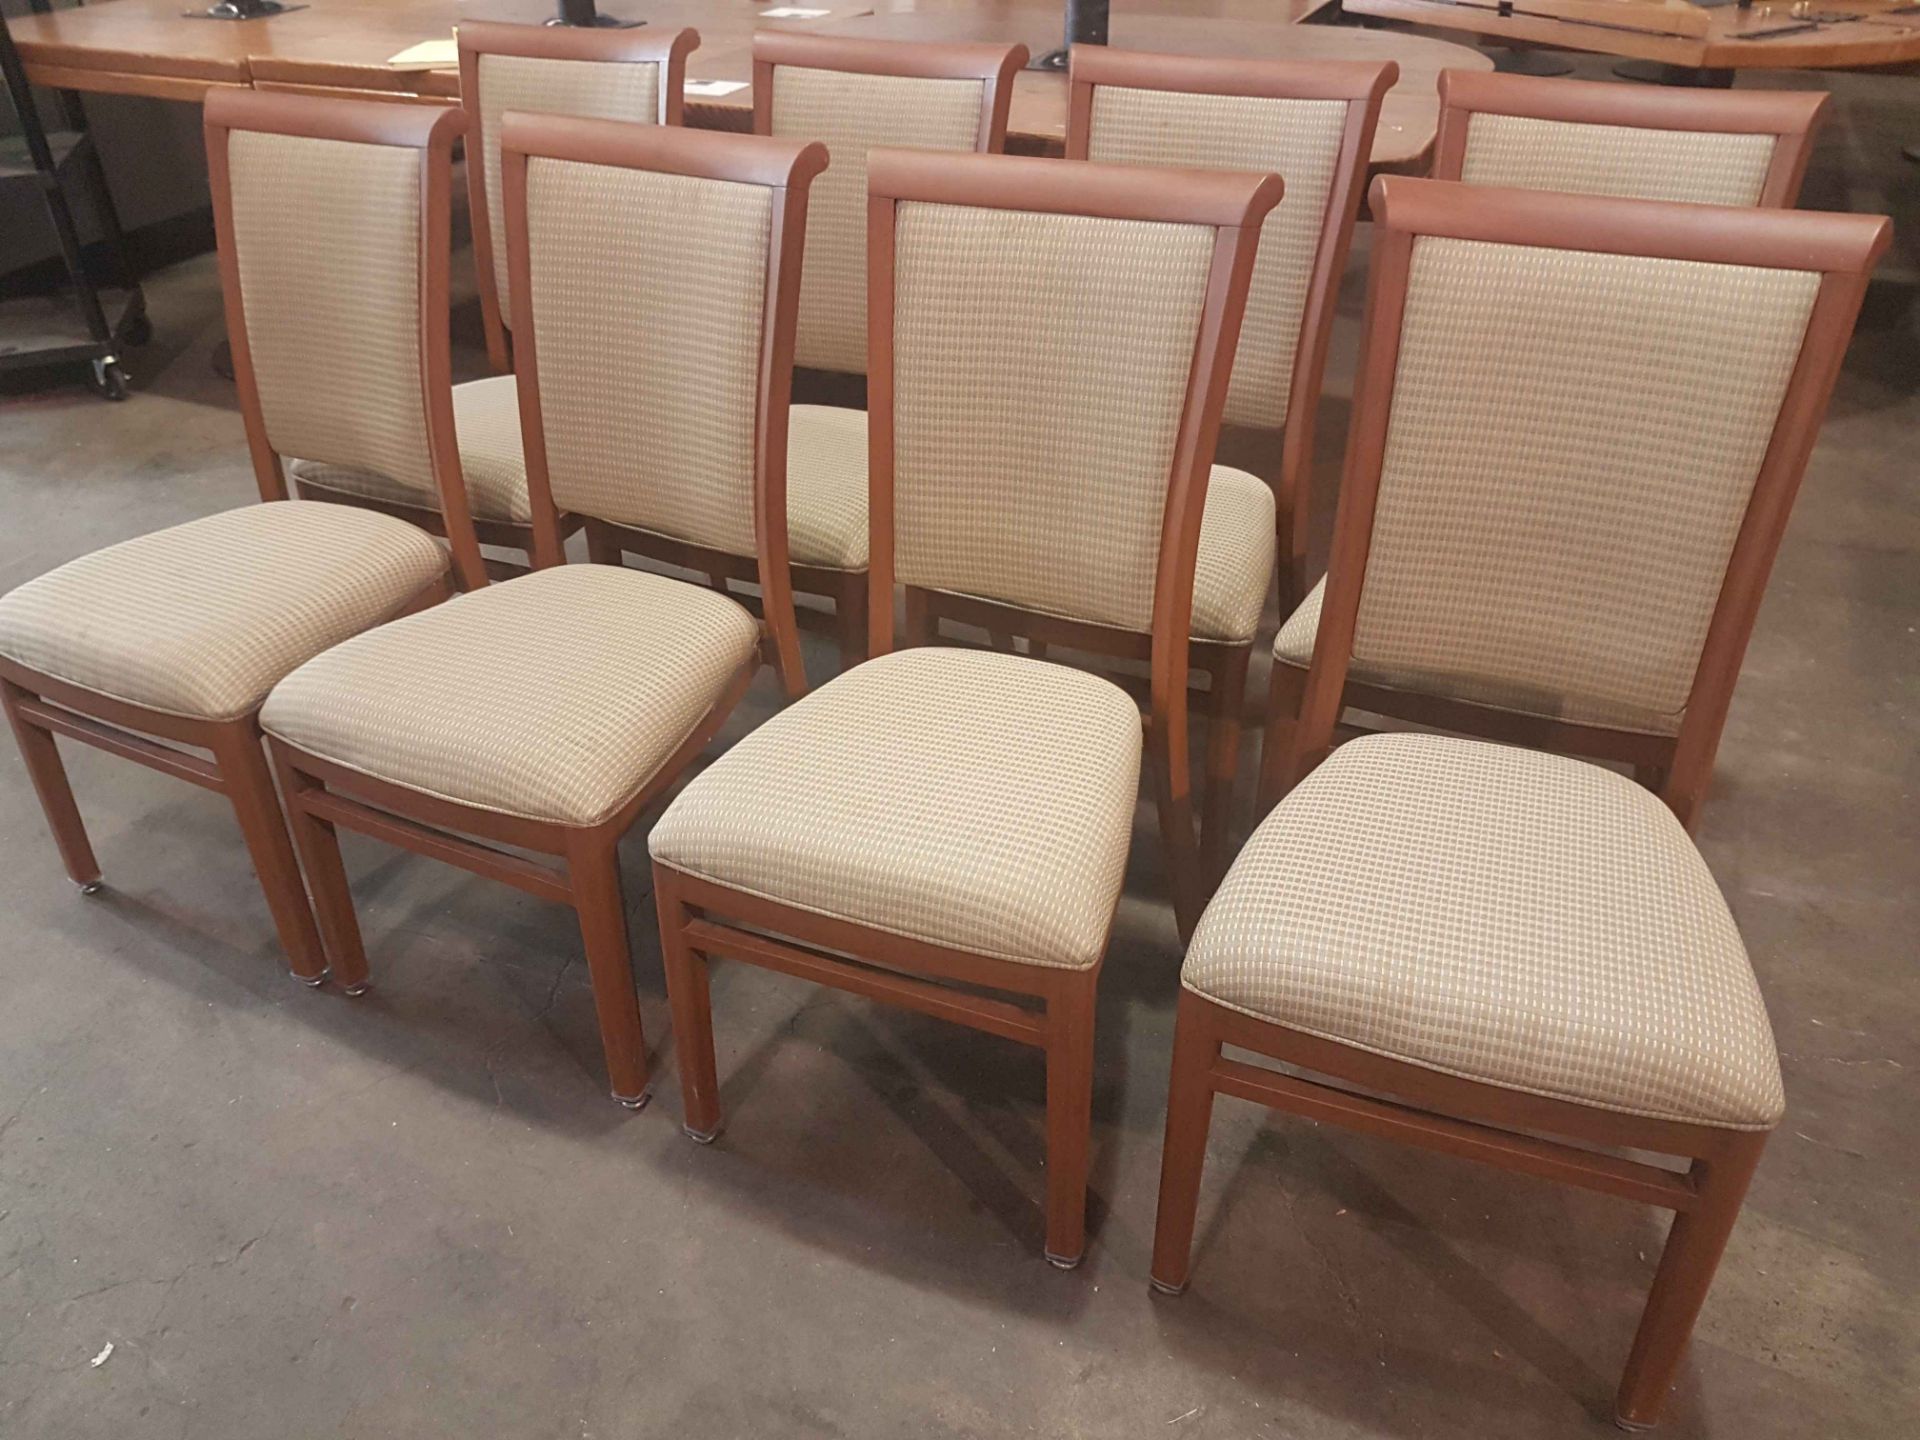 Brown Metal Framed Upholstered Chairs - Lot of 8 - USA Made - Image 2 of 3